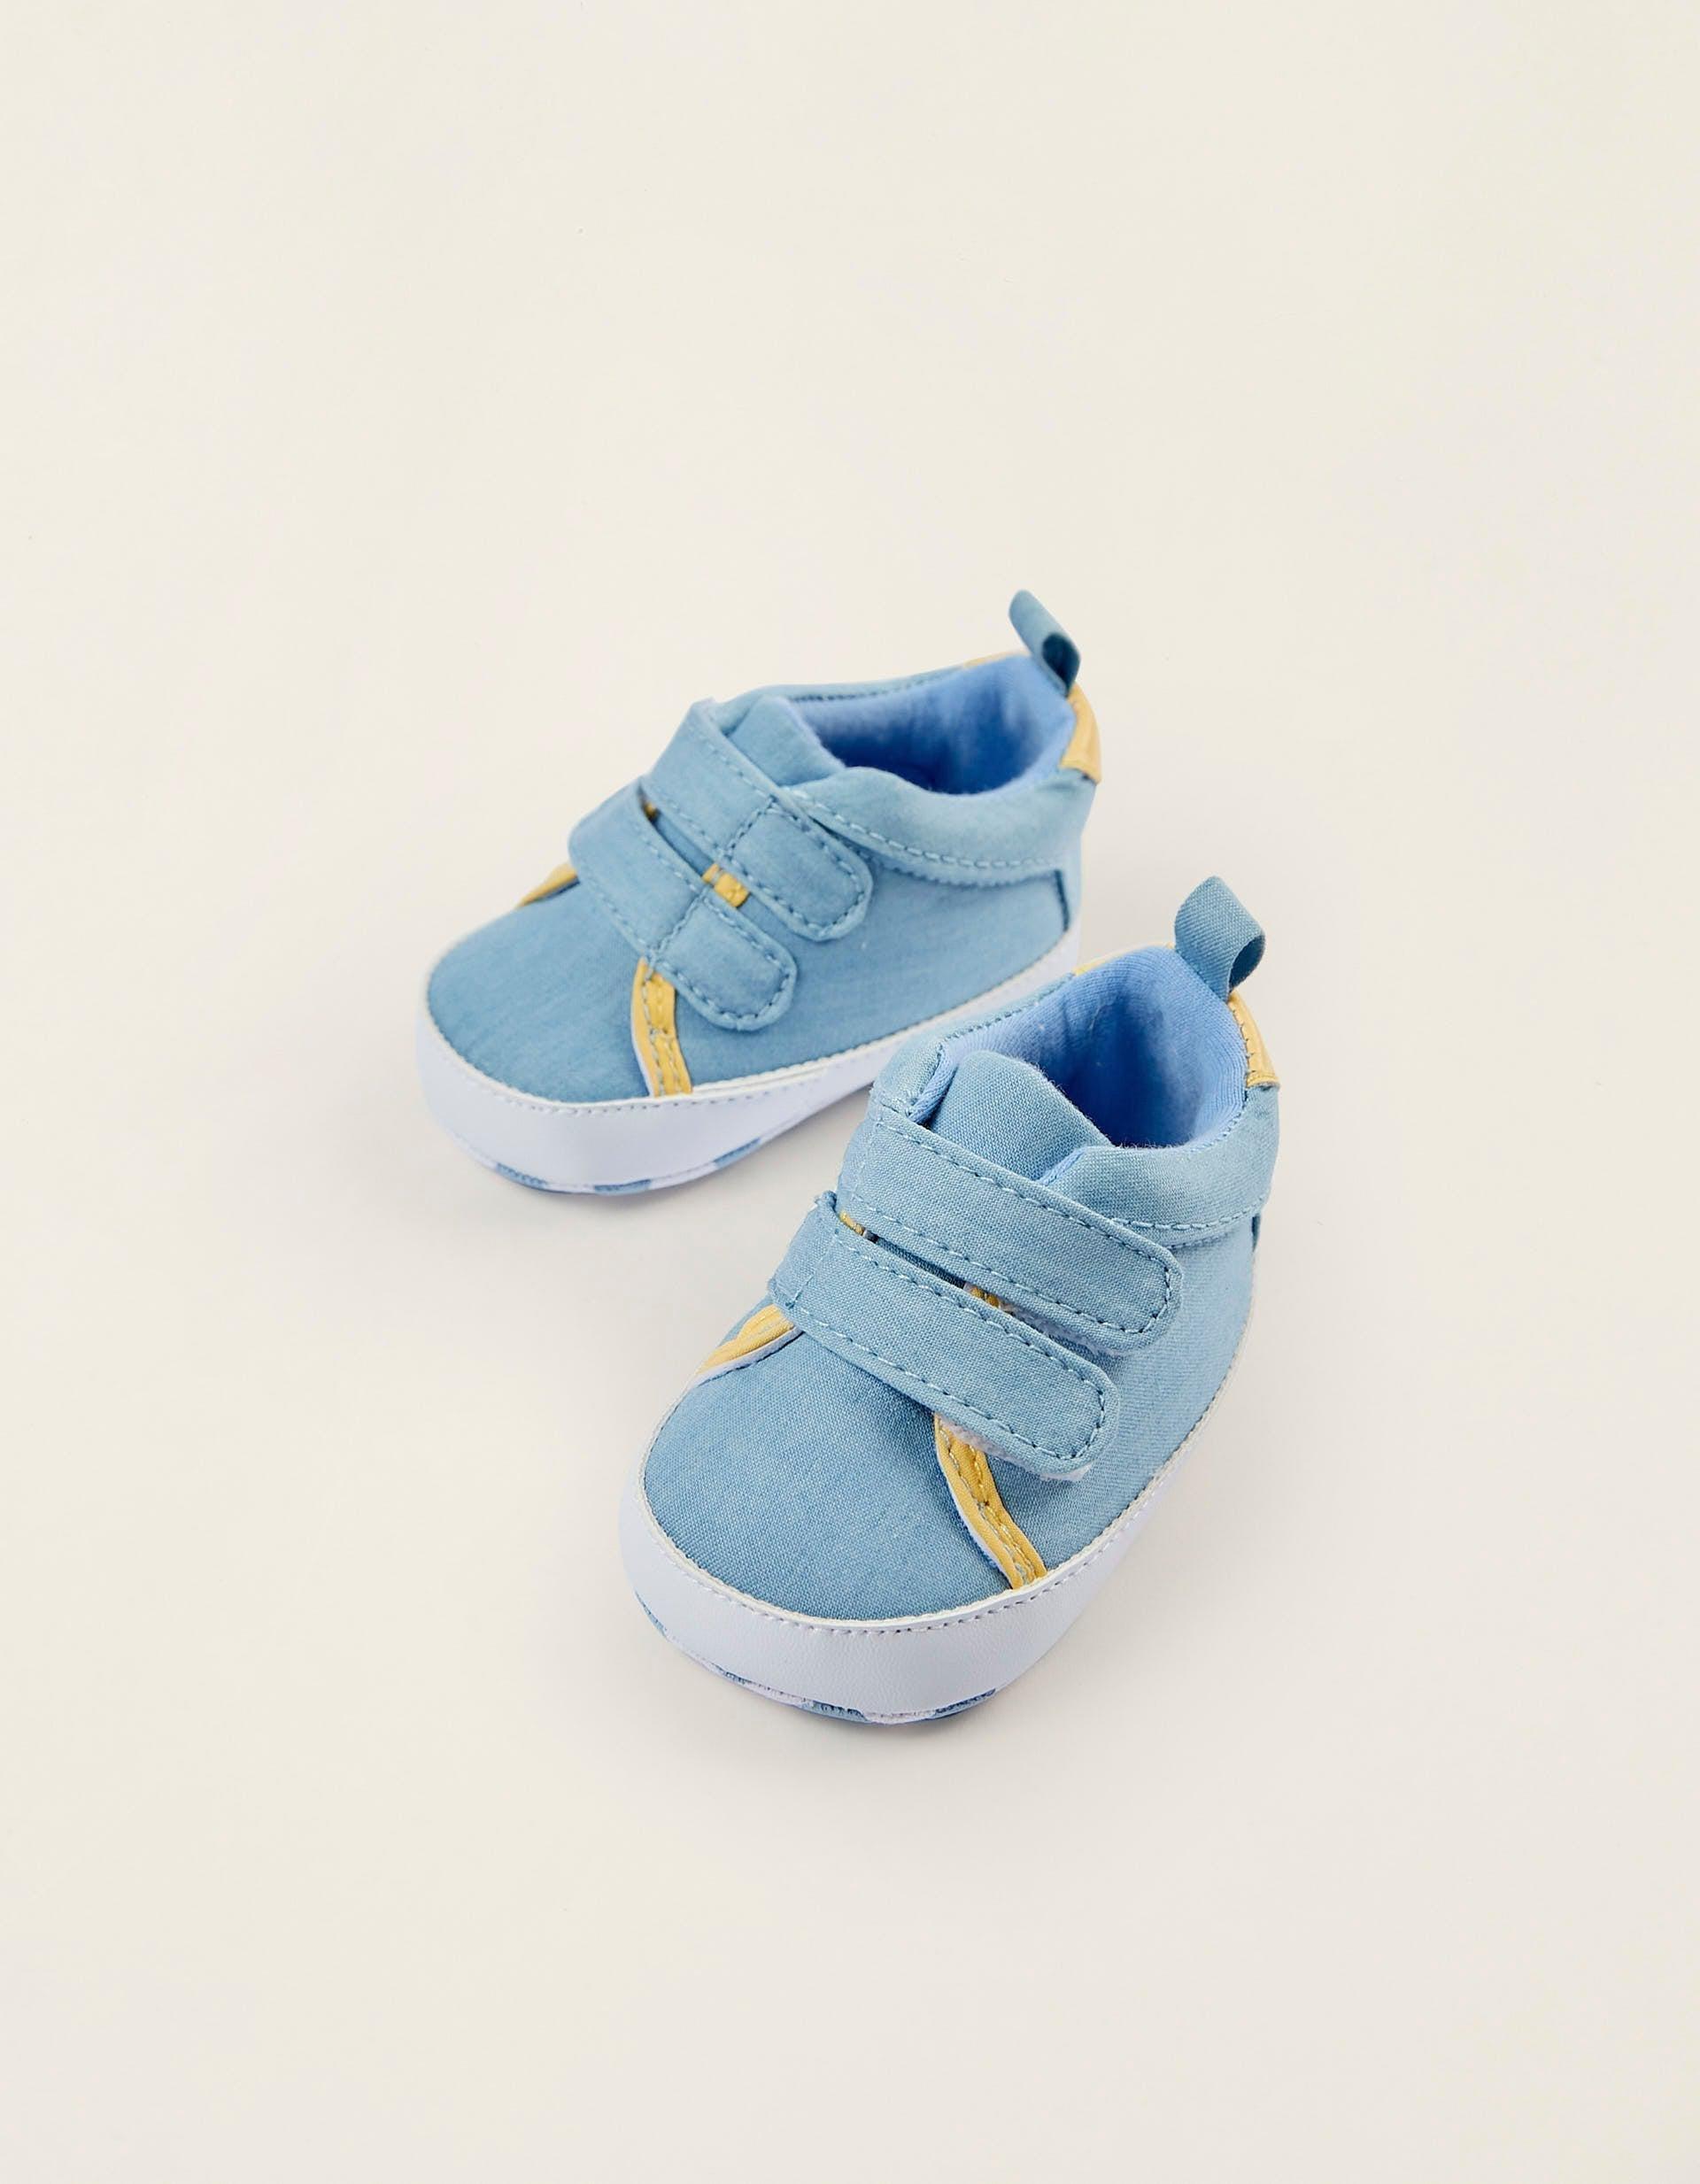 Gant - Blue Detailed Shoes, Baby Boys